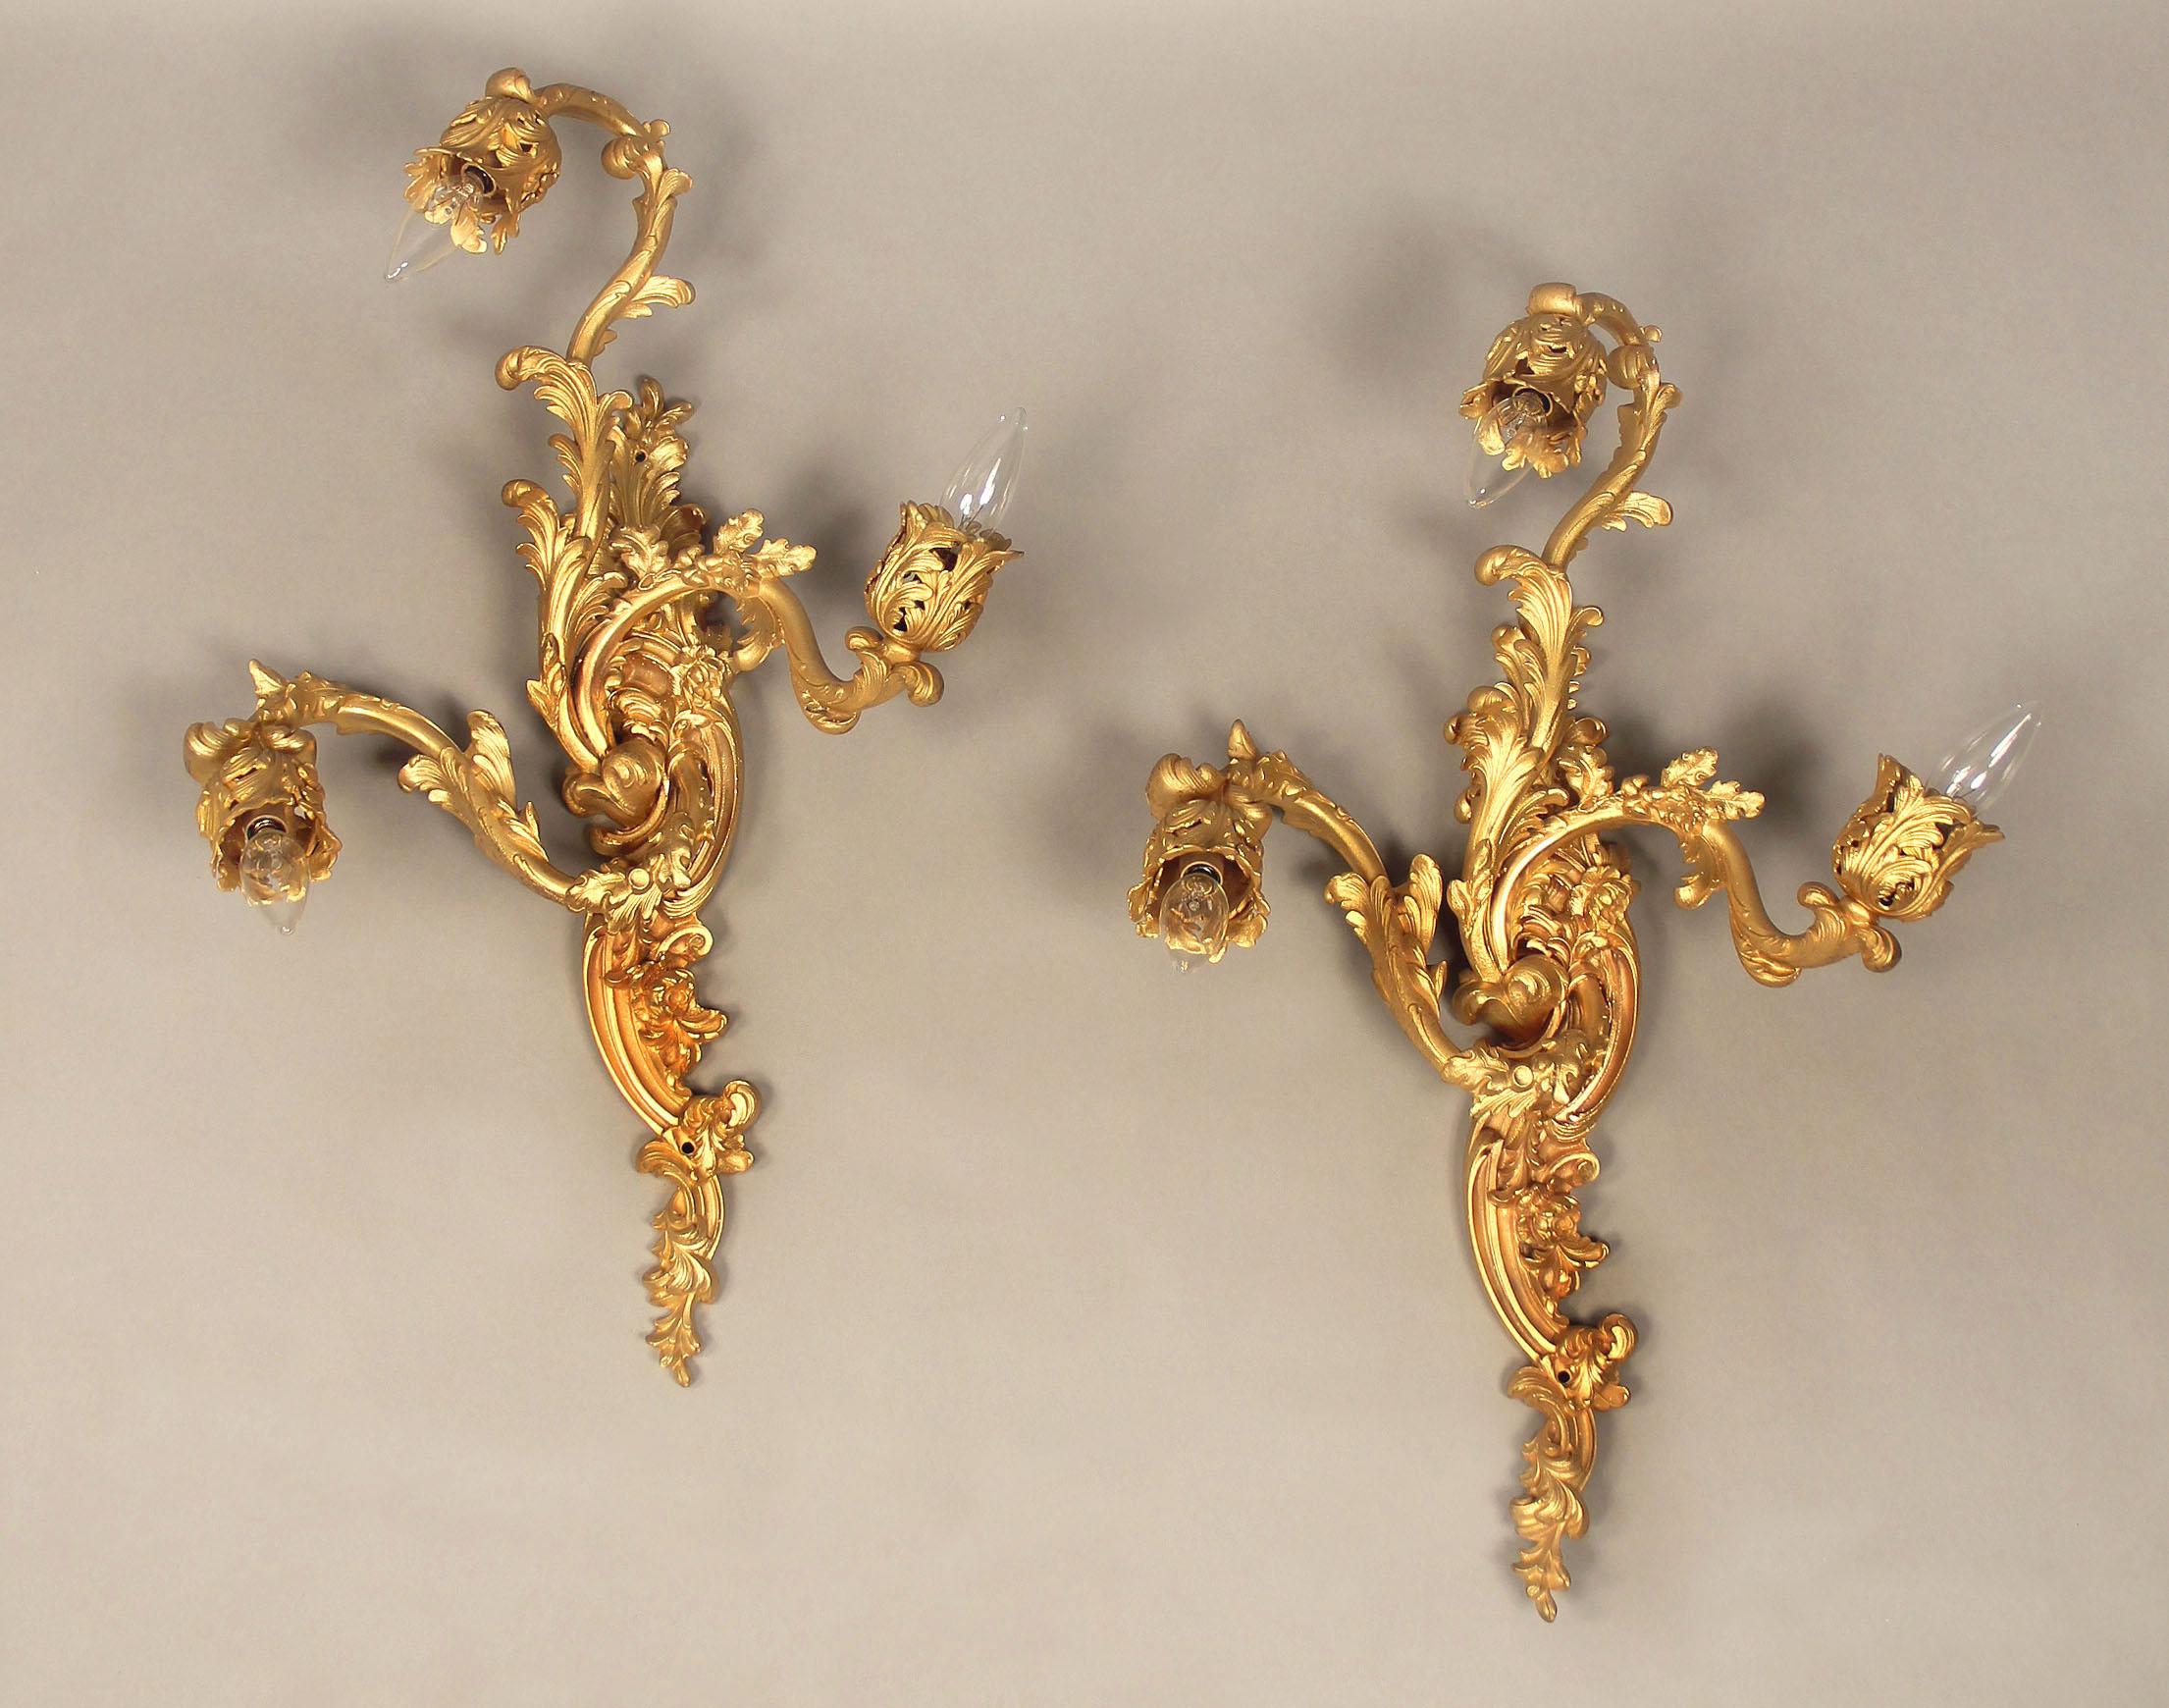 A pair of late 19th century gilt bronze three-light sconces

The backplate and arms decorated with flowers and foliage.